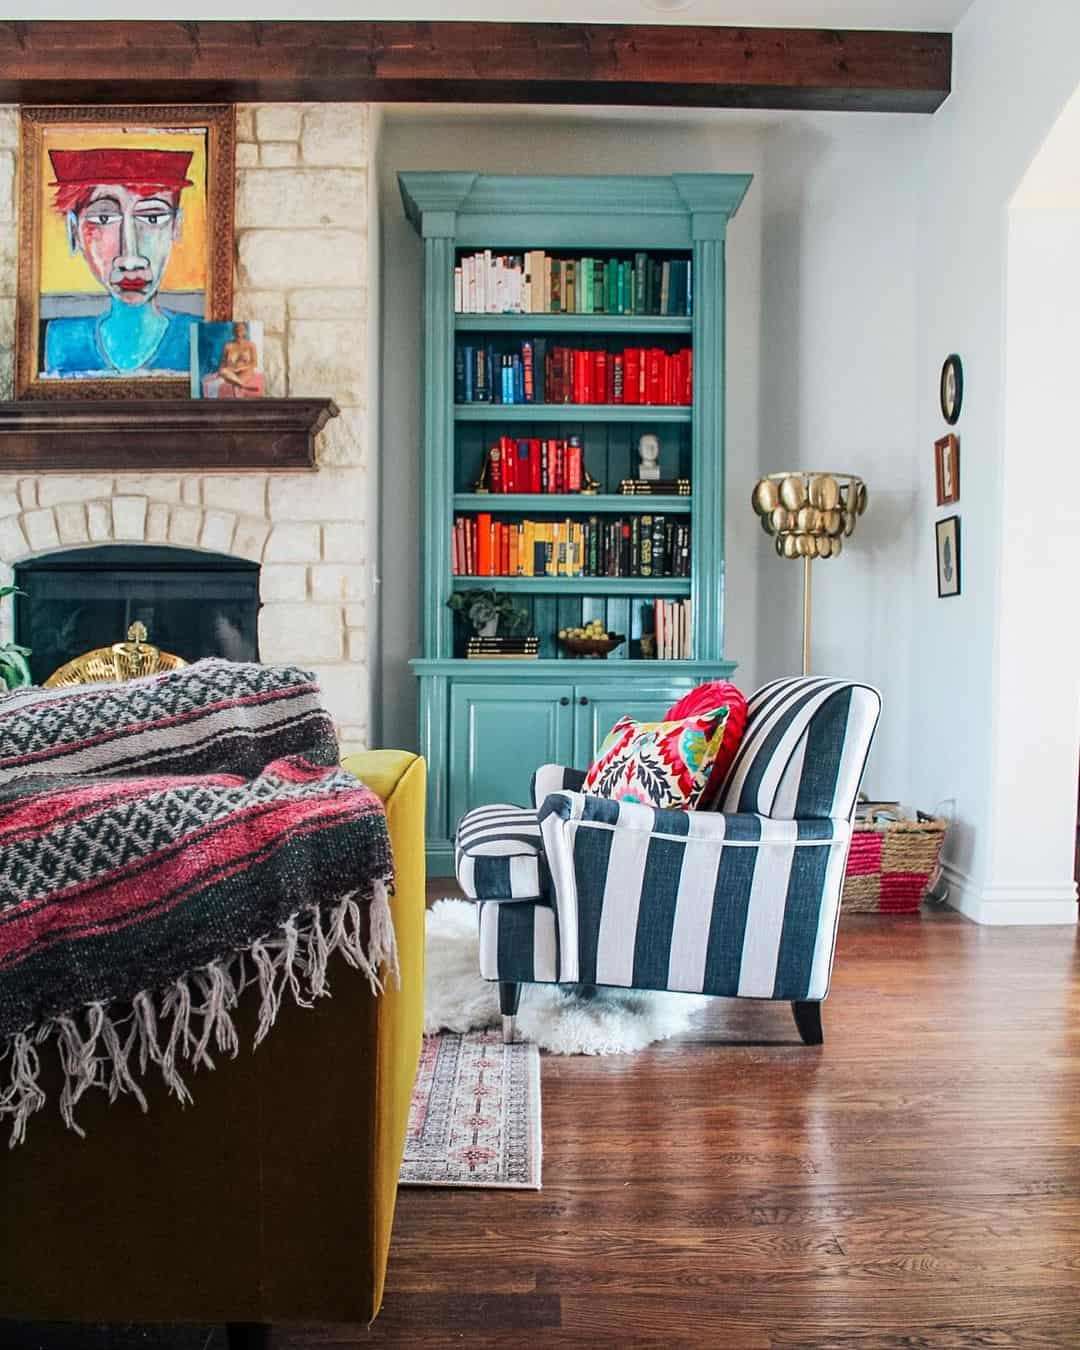 Lively Eclectic and Bohemian Home Interior Design by Sarisa Munoz